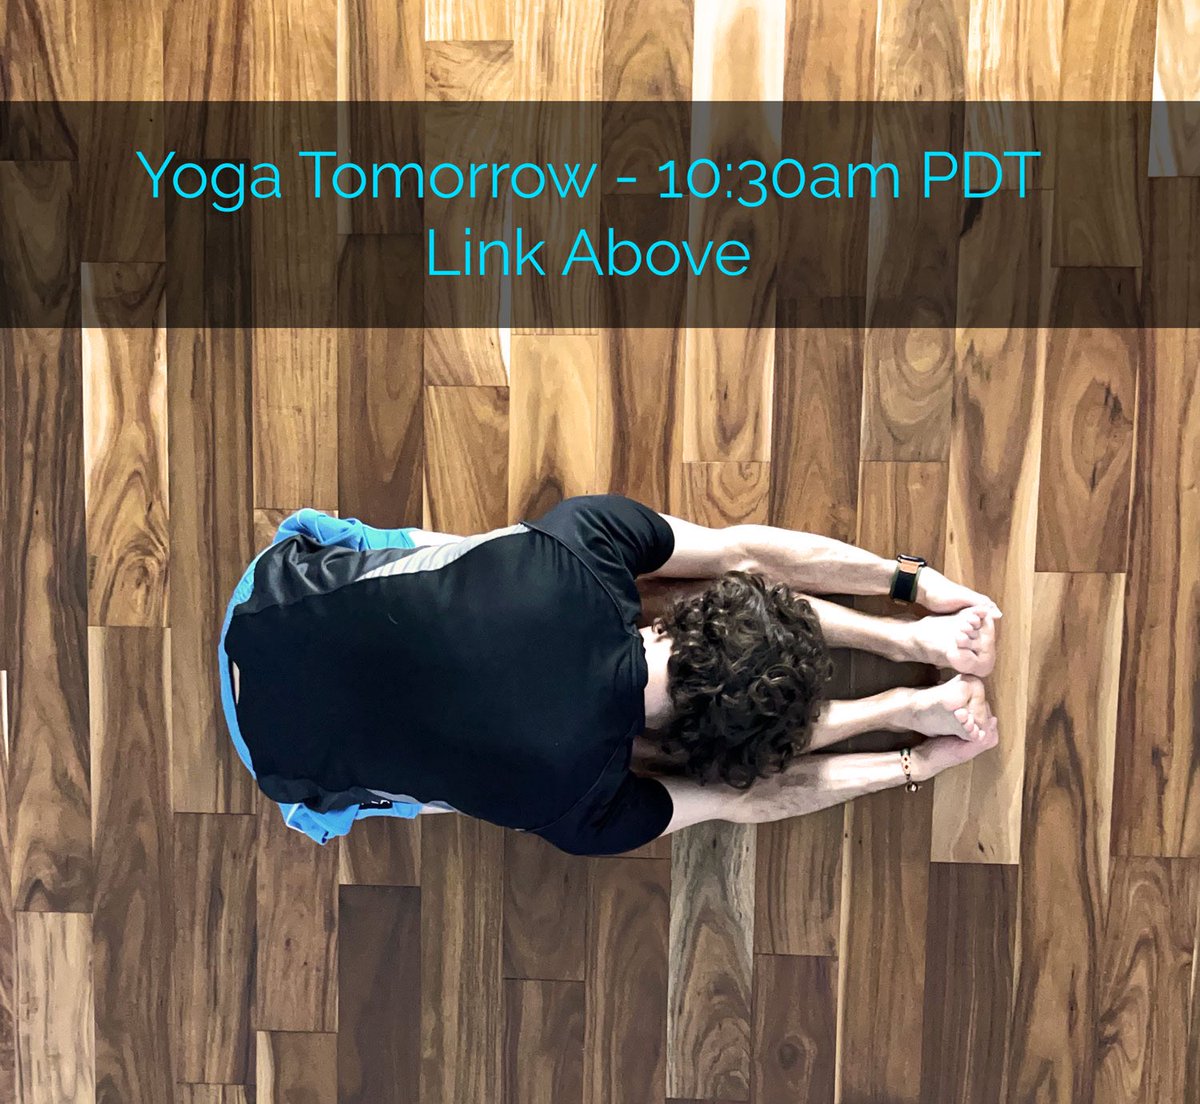 Introspection is one of the great qualities in Yoga. Join me tomorrow at 9:30am PDT 🔺 eventbrite.com/e/trevors-zoom… 🔺 #streamingyoga #onlineyoga #yogateacher #yogaclass #donationyoga #mixedlevelyoga #paschimottanasana #forwardfold